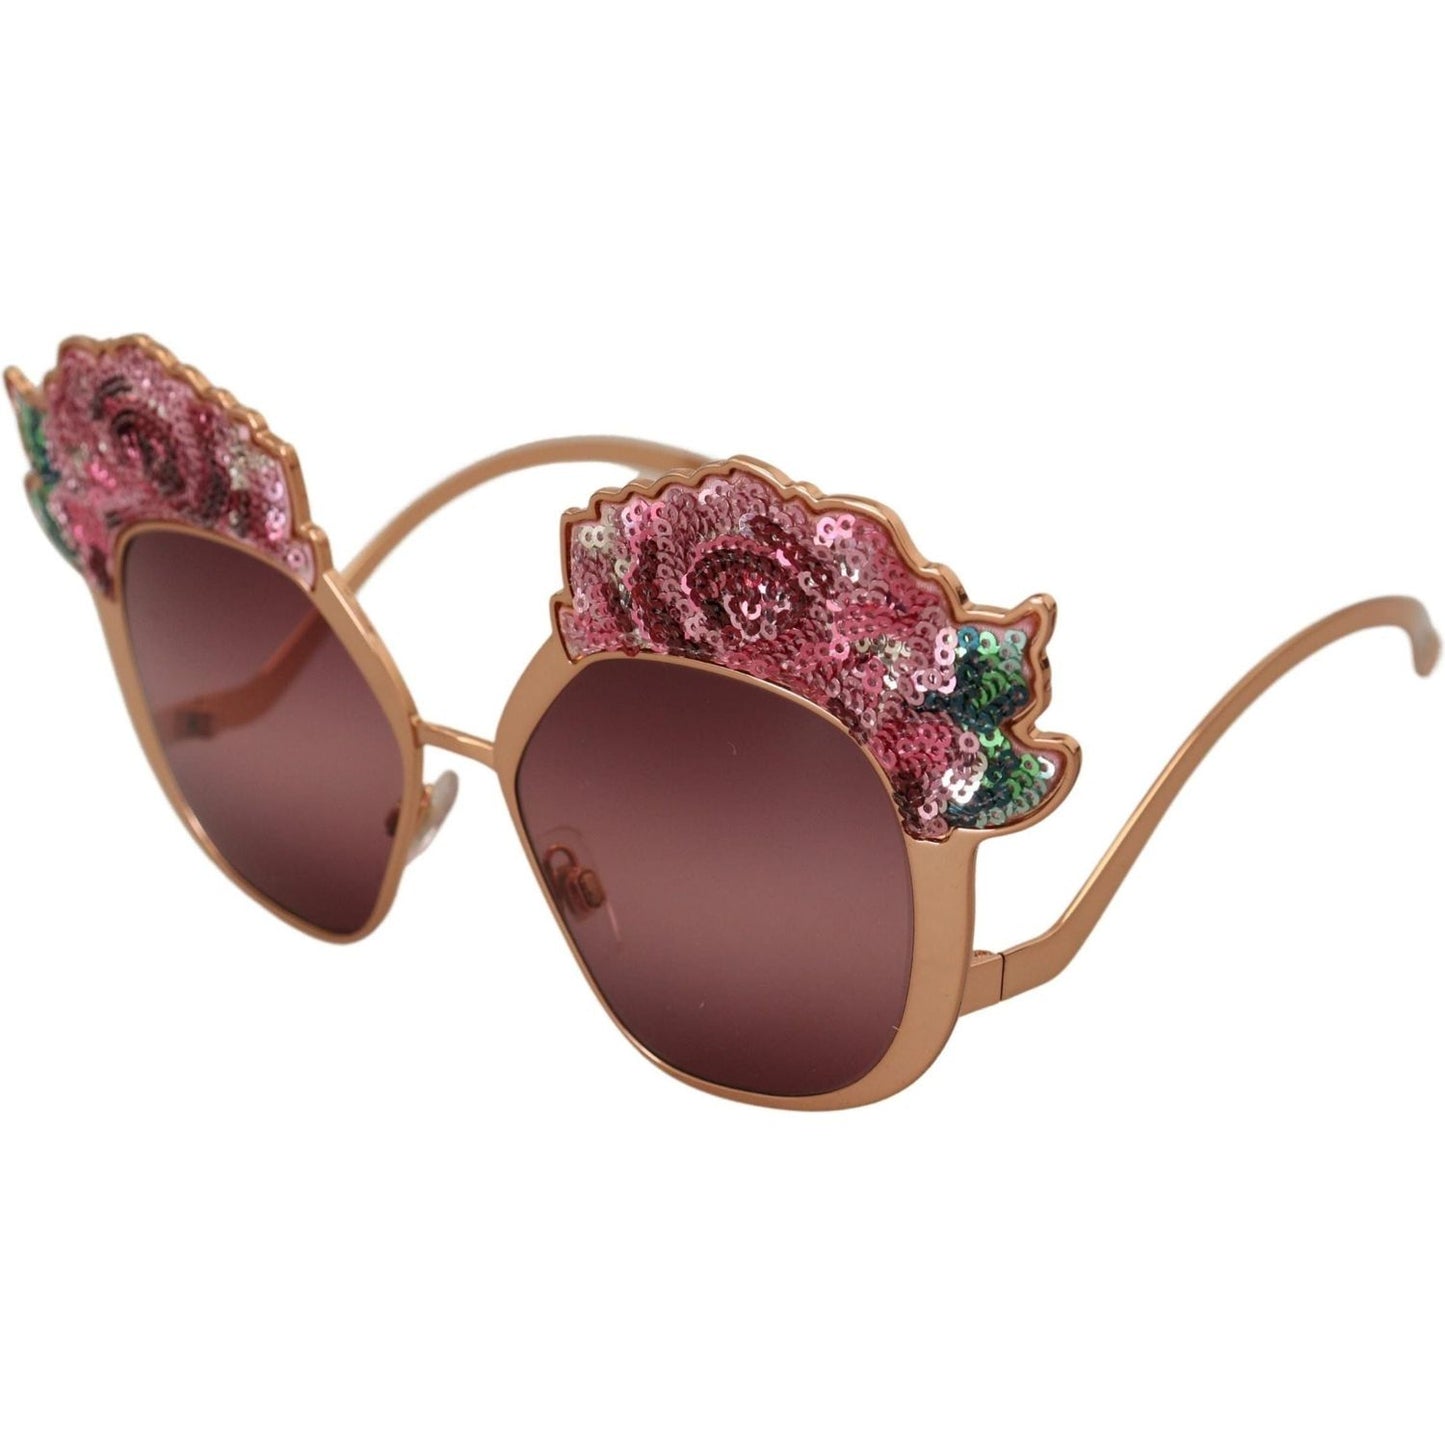 Dolce & Gabbana Chic Rose Sequin Embroidered Sunglasses pink-gold-rose-sequin-embroidery-dg2202-sunglasses IMG_5689-scaled-ab93fe1d-393.jpg